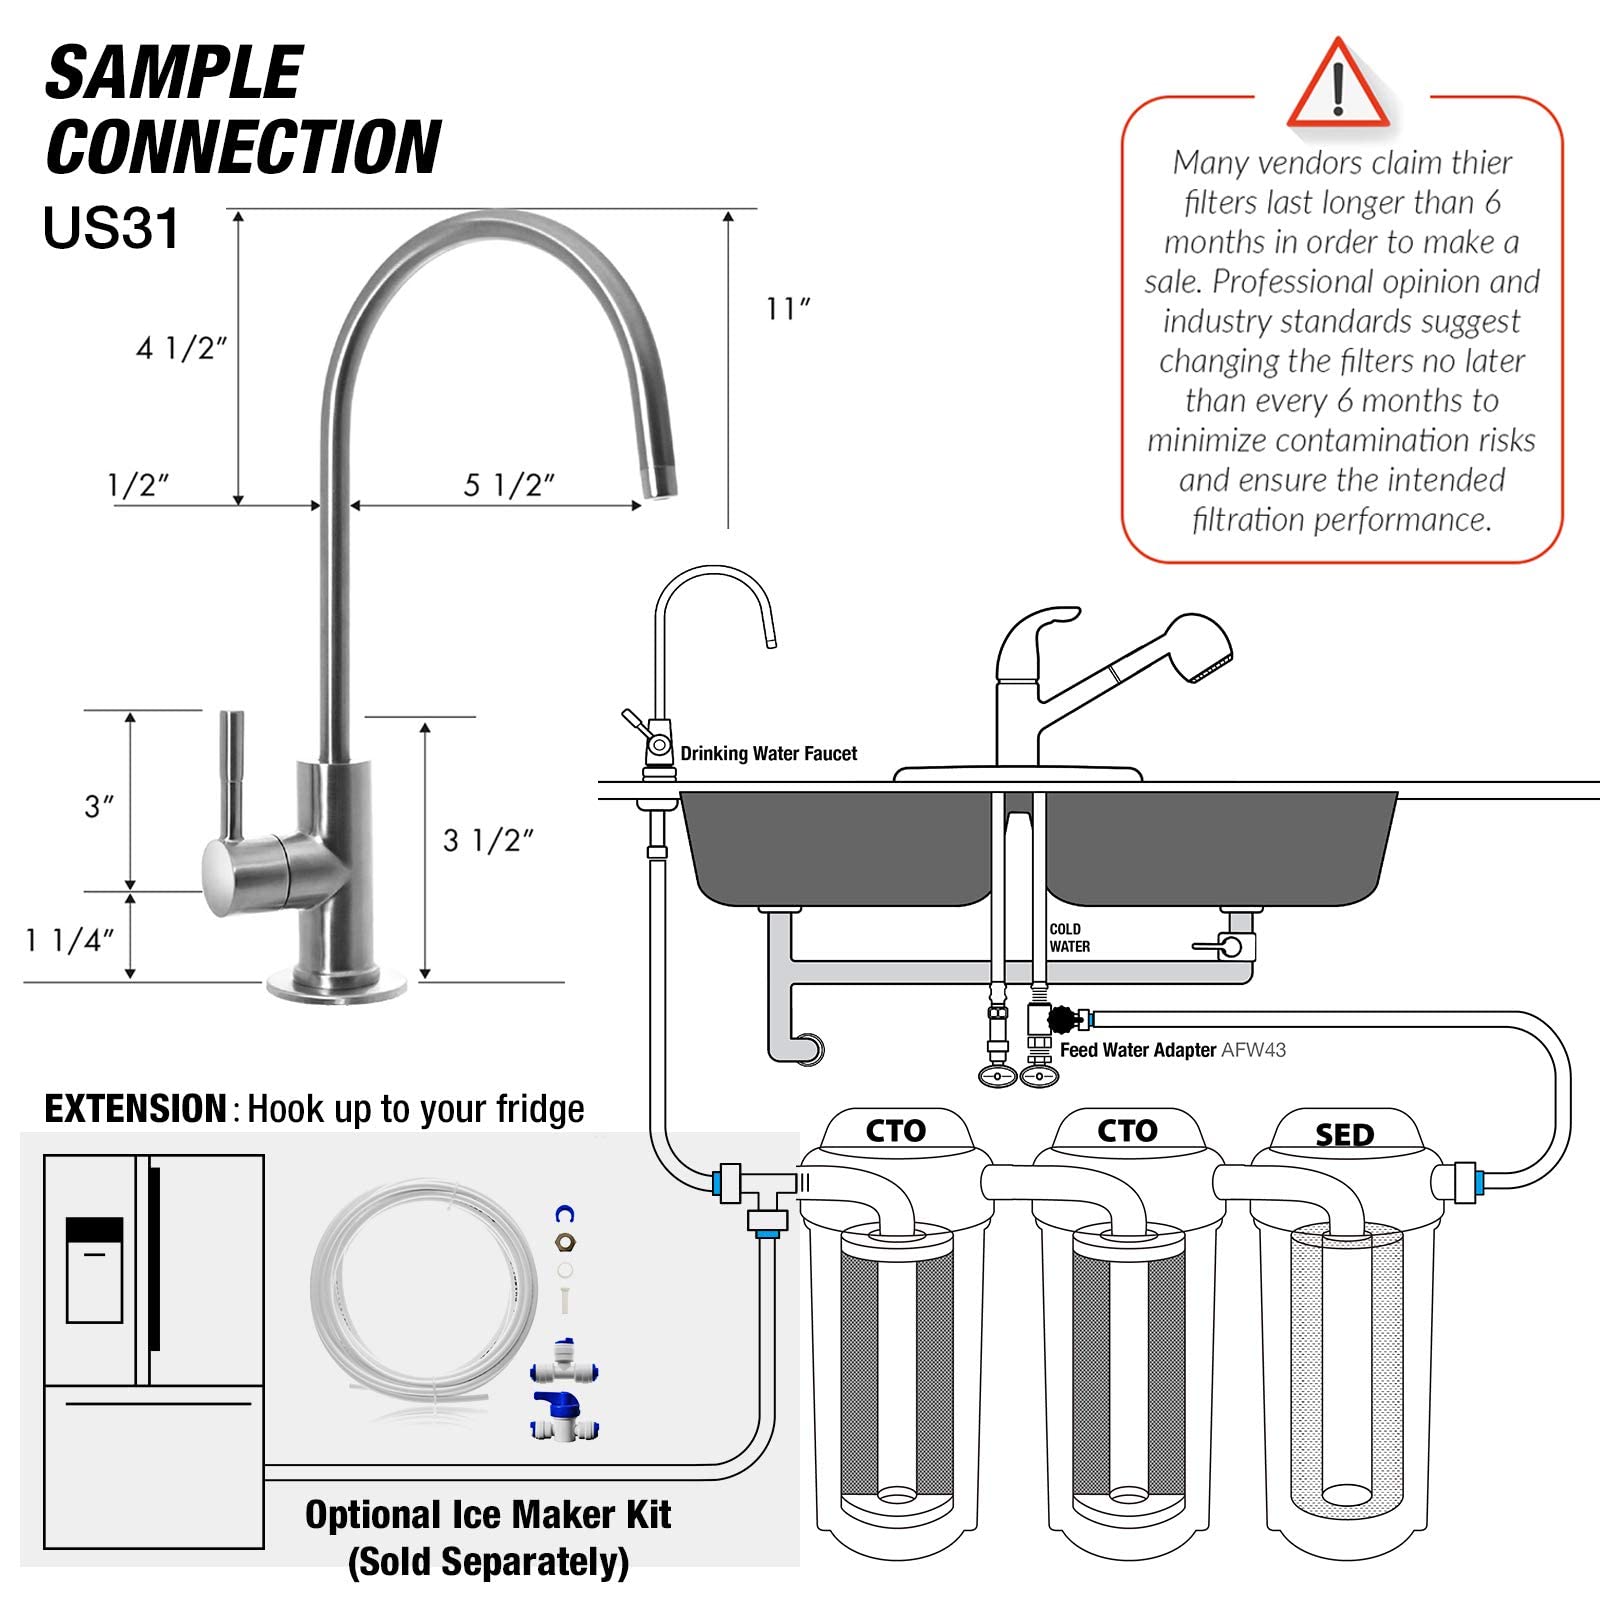 iSpring US31 Classic 3-Stage Under Sink Water Filtration System for Drinking, Tankless, High Capacity, Sediment + Carbon + Carbon (Newest Version)